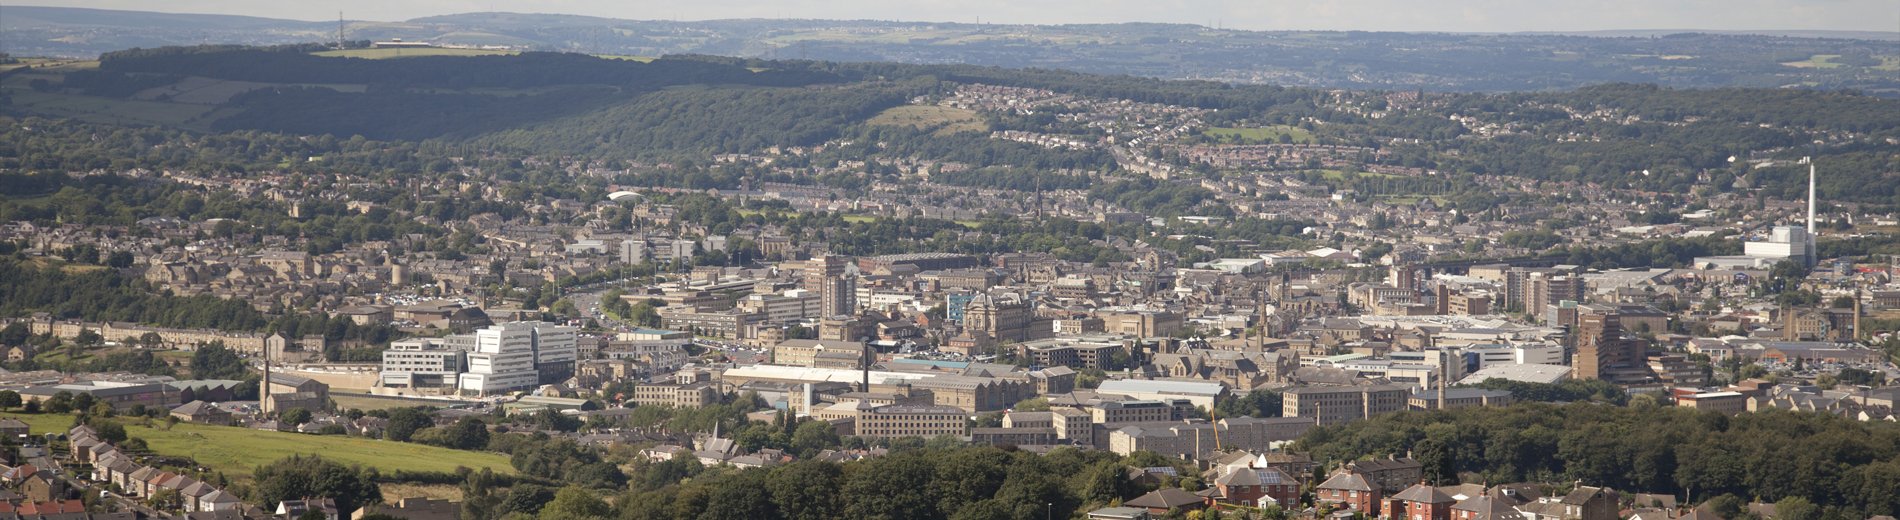 A view of Huddersfield town centre from a high point